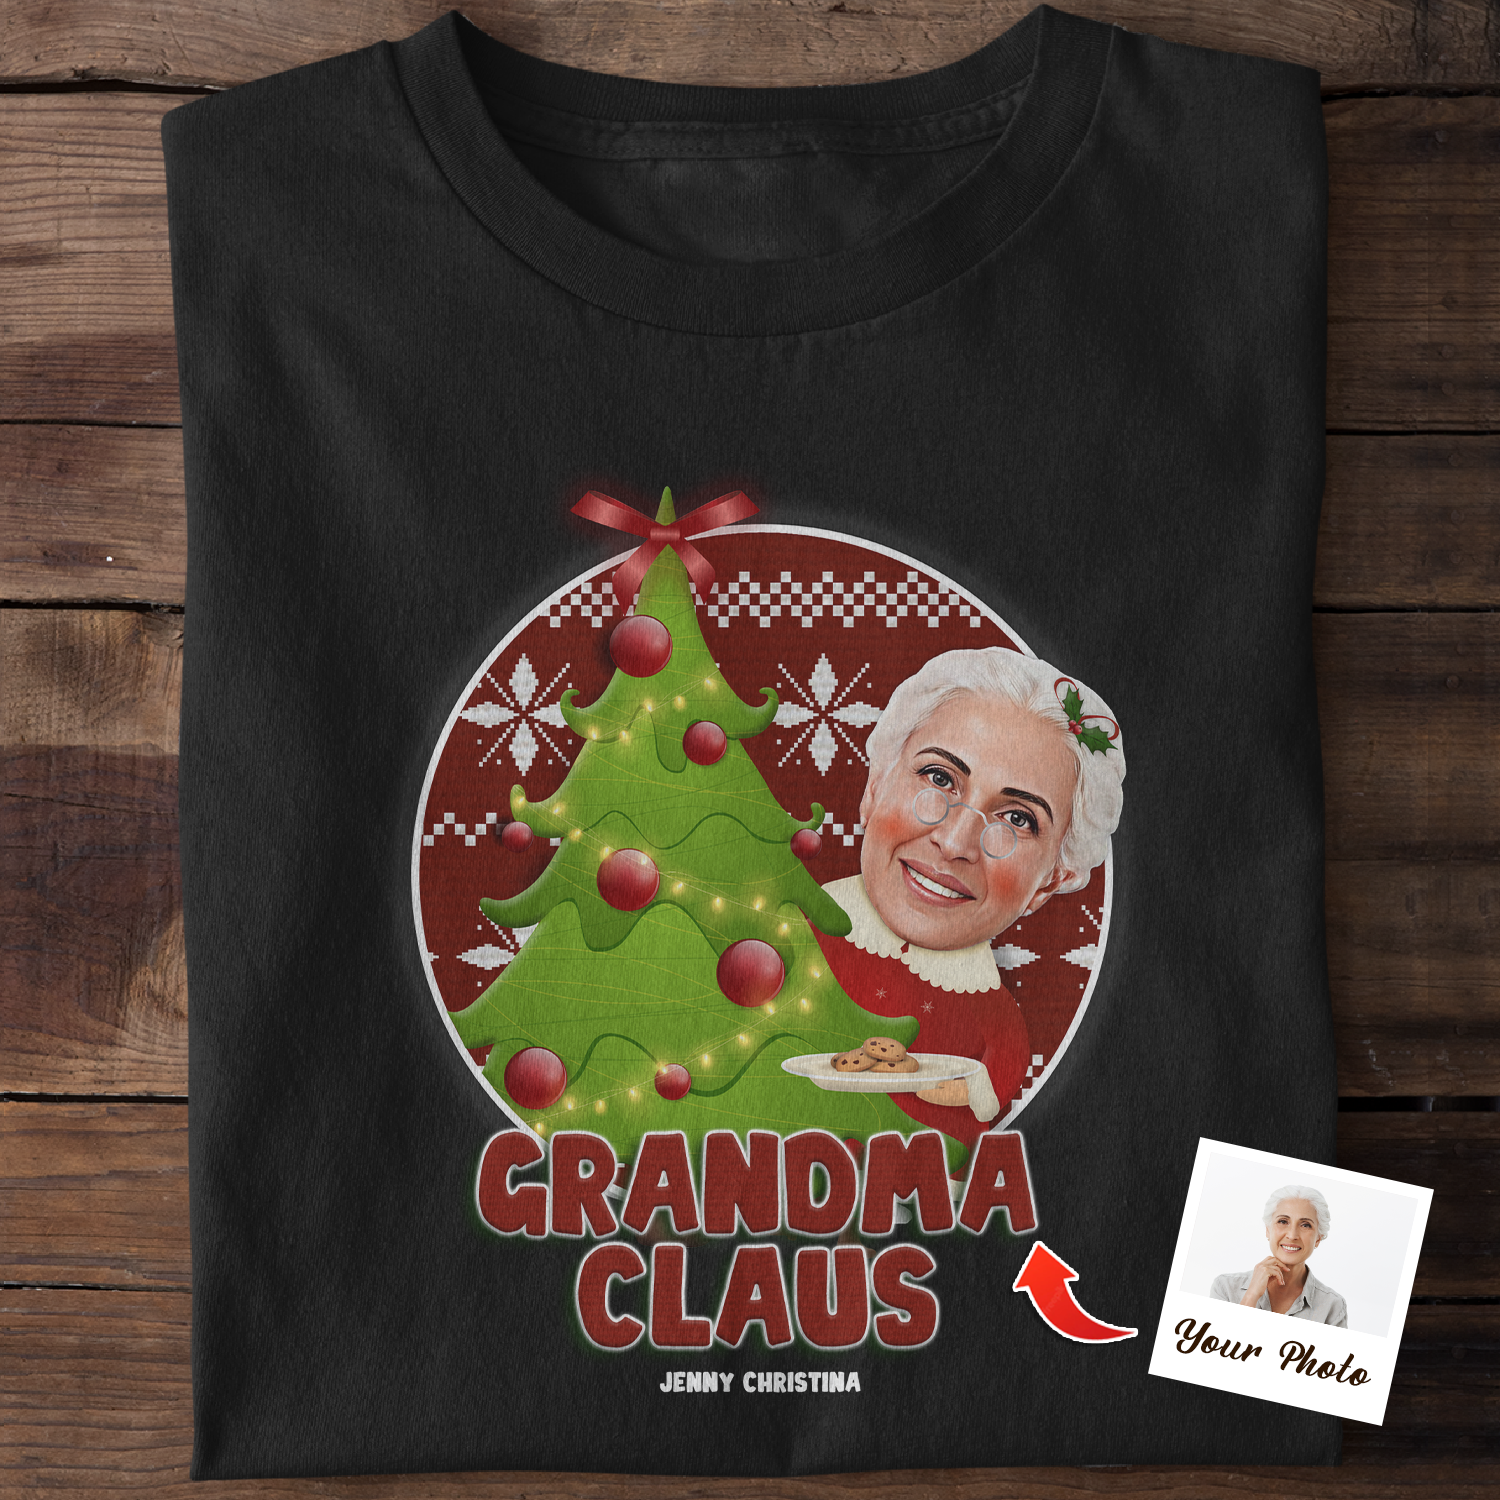 Custom Portrait From Photo, Grandma Claus, Personalized Name And Text, Christmas T-Shirts